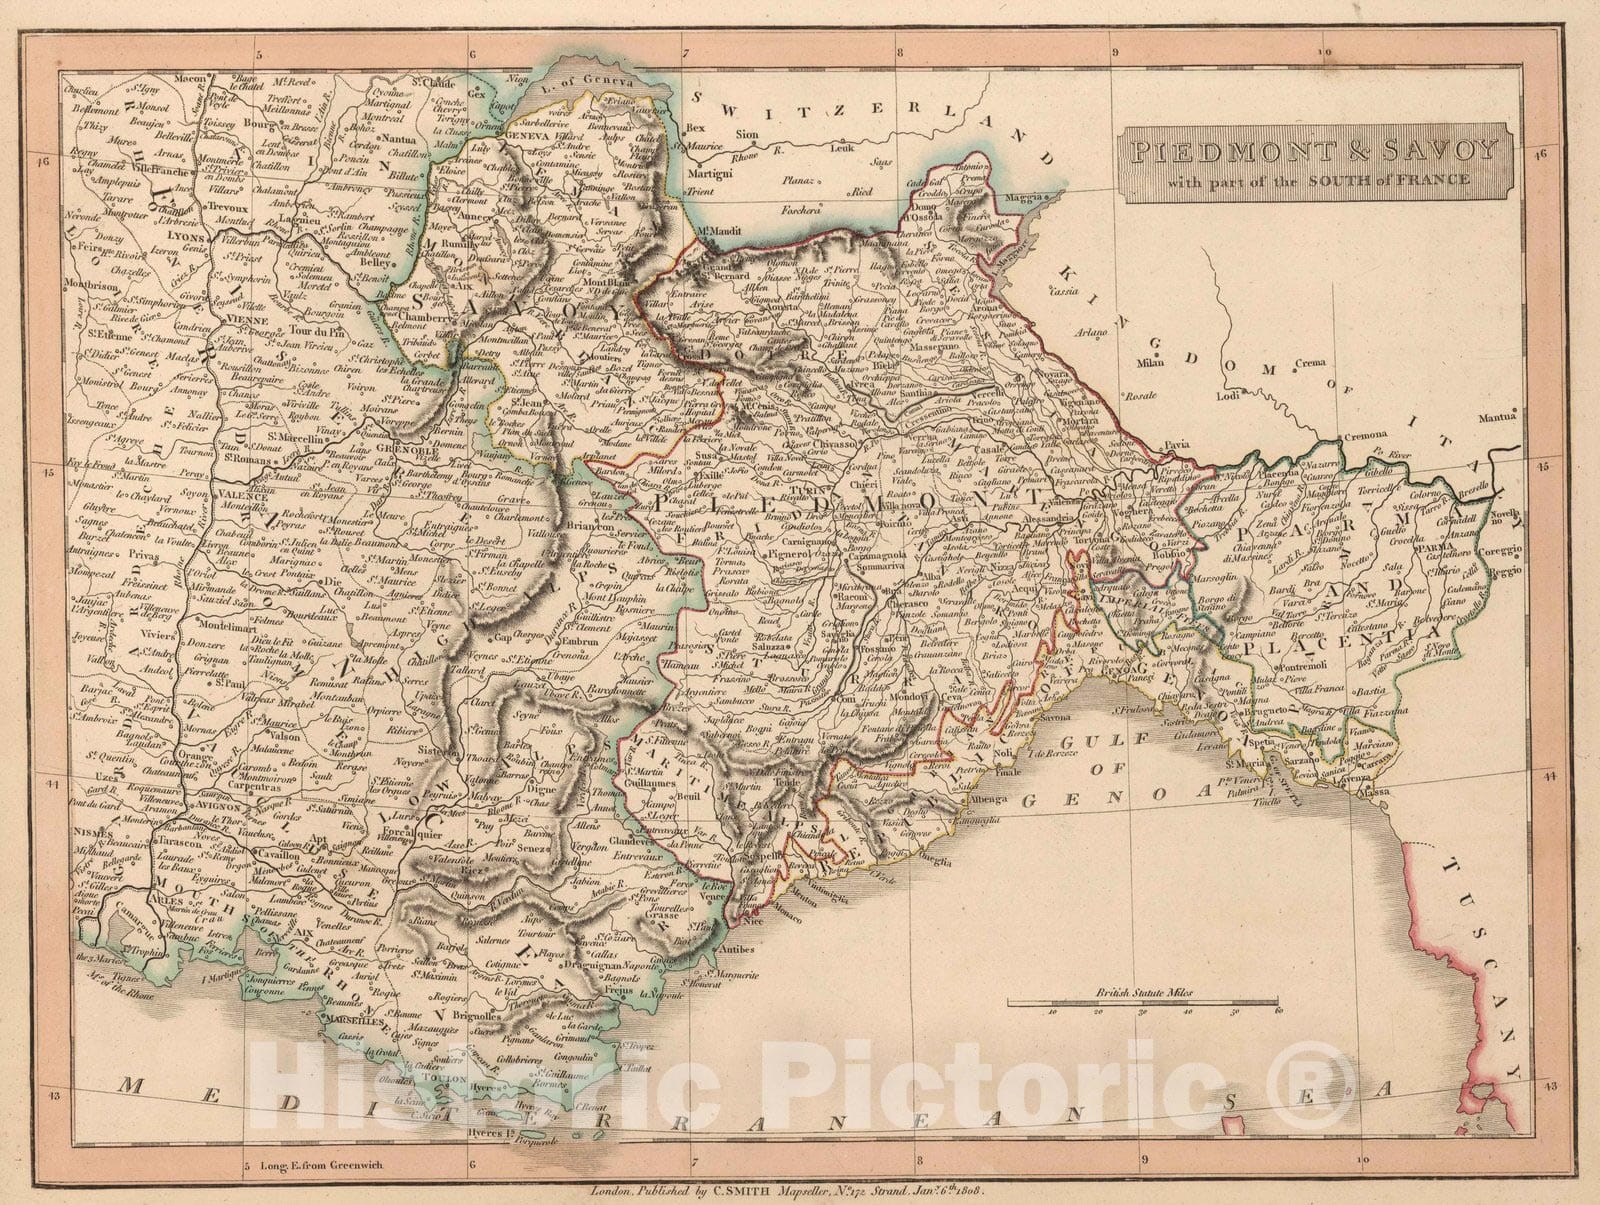 Historic Map : 1808 Piedmont & Savoy with Part of the South of France. - Vintage Wall Art